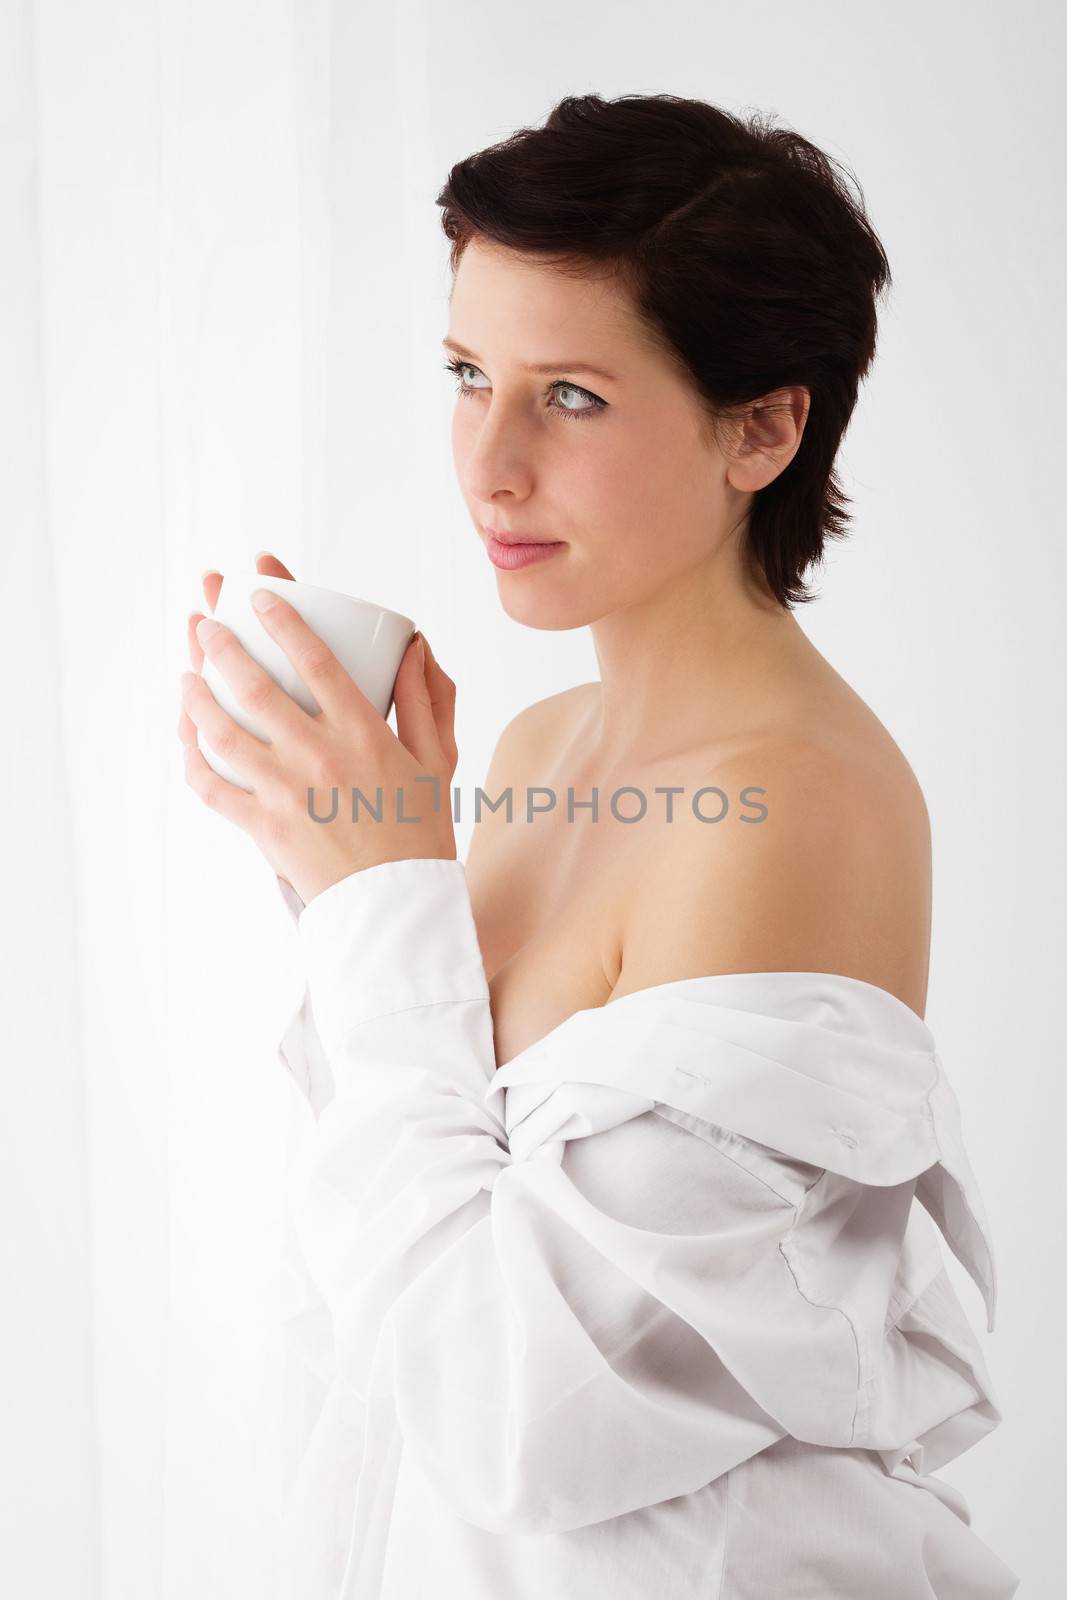 sensual woman at a window holding coffee wearing a white button down shirt